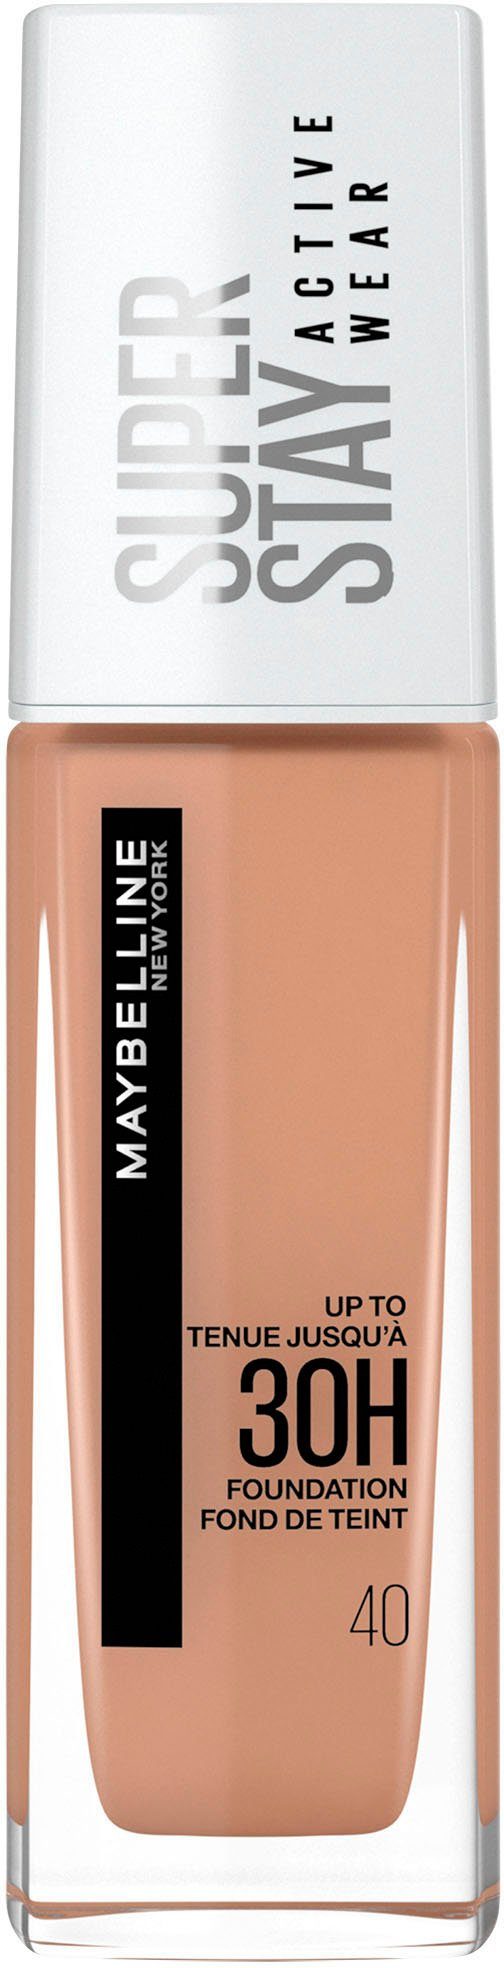 Wear 40 Stay NEW Super Foundation Active YORK MAYBELLINE Fawn